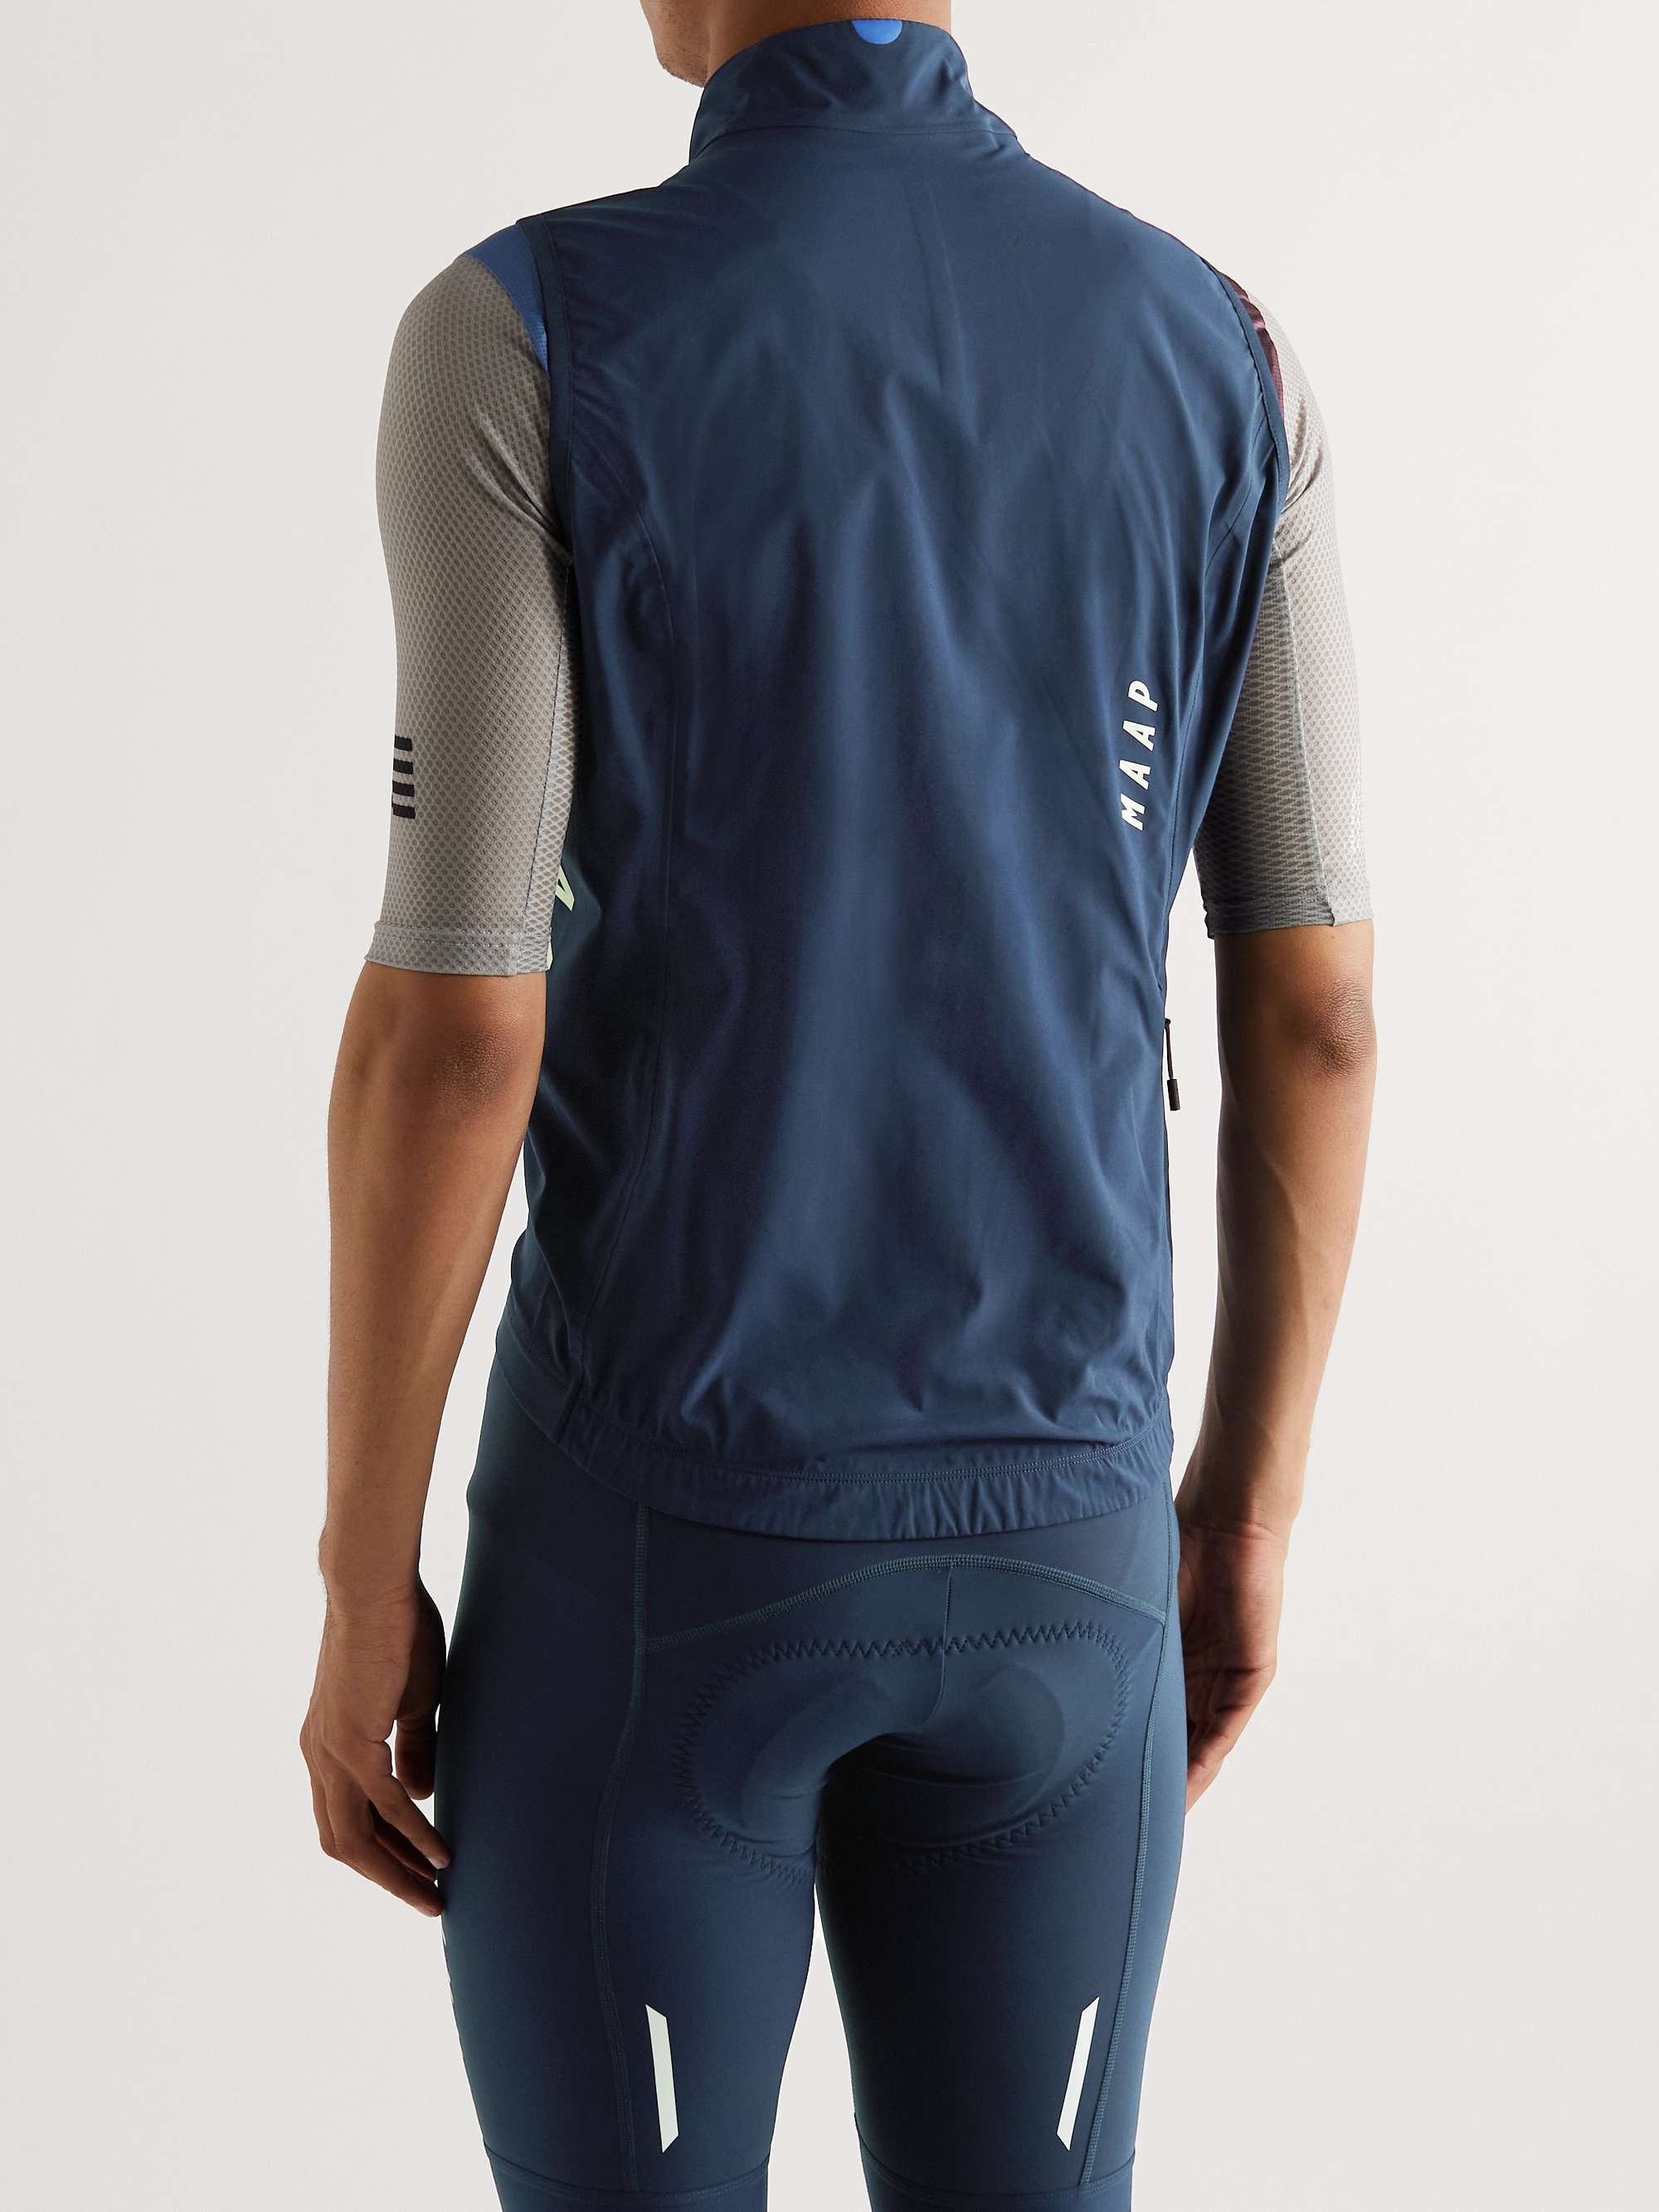 MAAP Prime Stow Shell Cycling Gilet